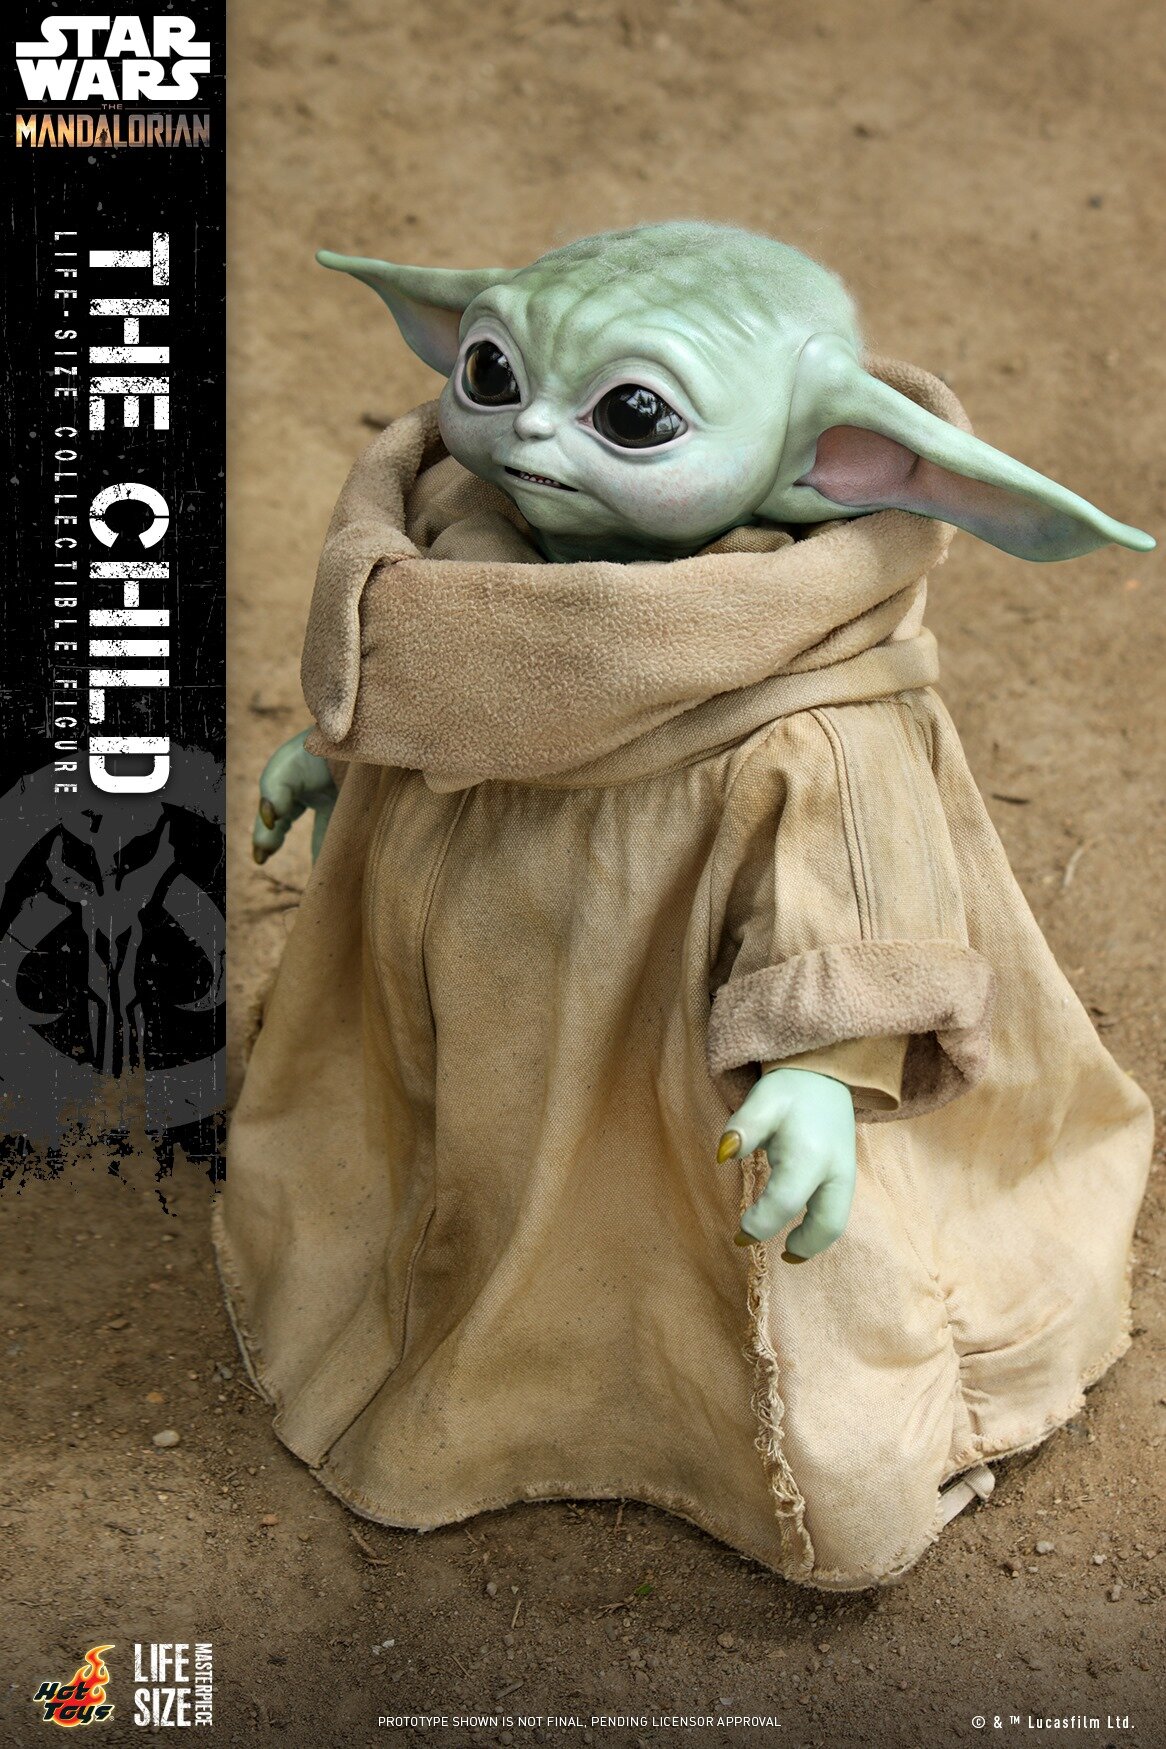 Hot Toys Shares Its Life Size Baby Yoda Action Figure From THE